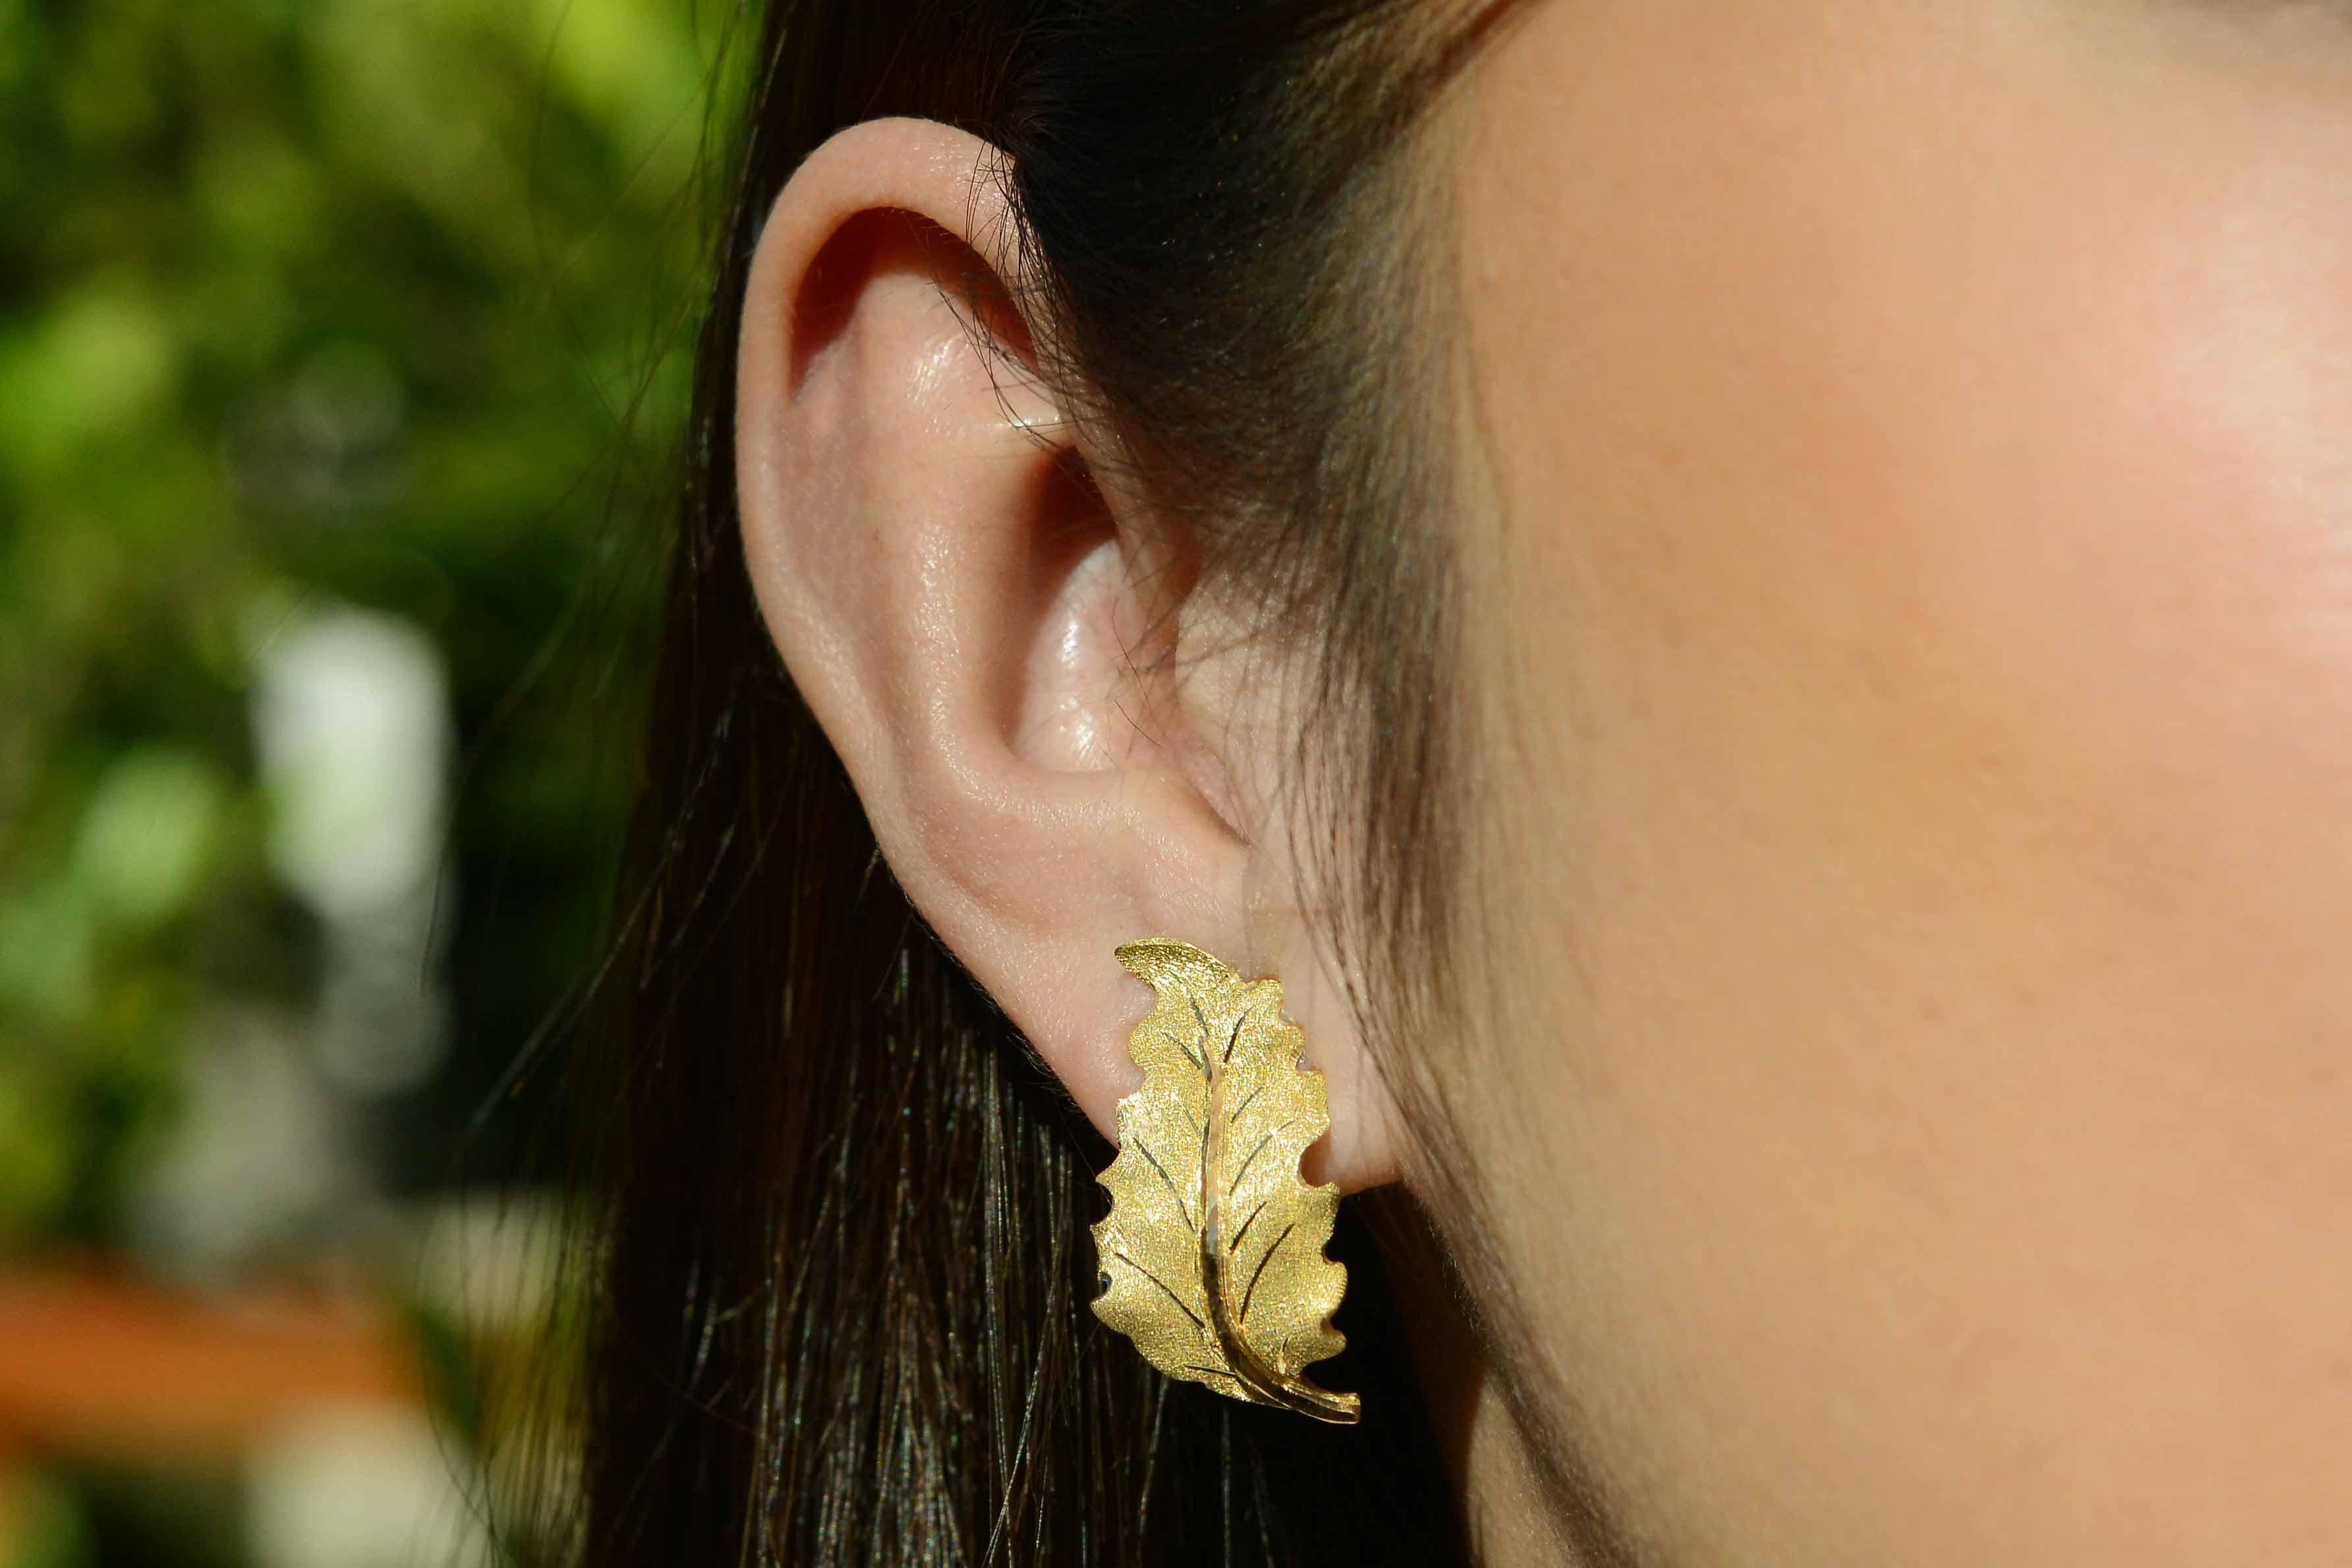 An exceptional pair of finely detailed 18k yellow gold earclip earrings. The satiny stem is exquisitely contrasted with frost-like gold leaves featuring their signature engraving effect. Buccellati is famed for their top quality pieces and